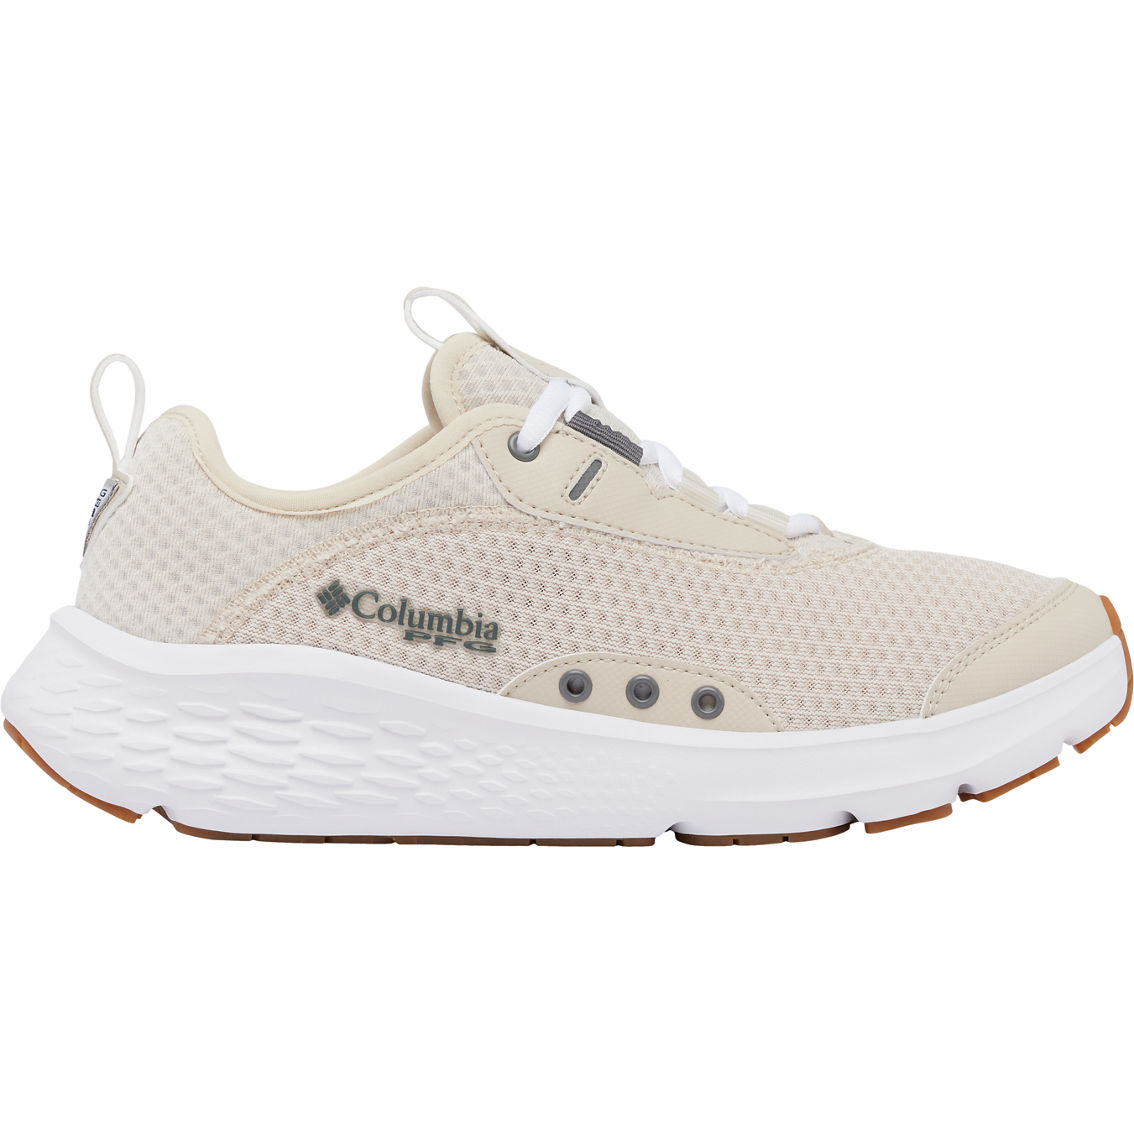 Columbia Women's Castback PFG Shoes - Image 2 of 8